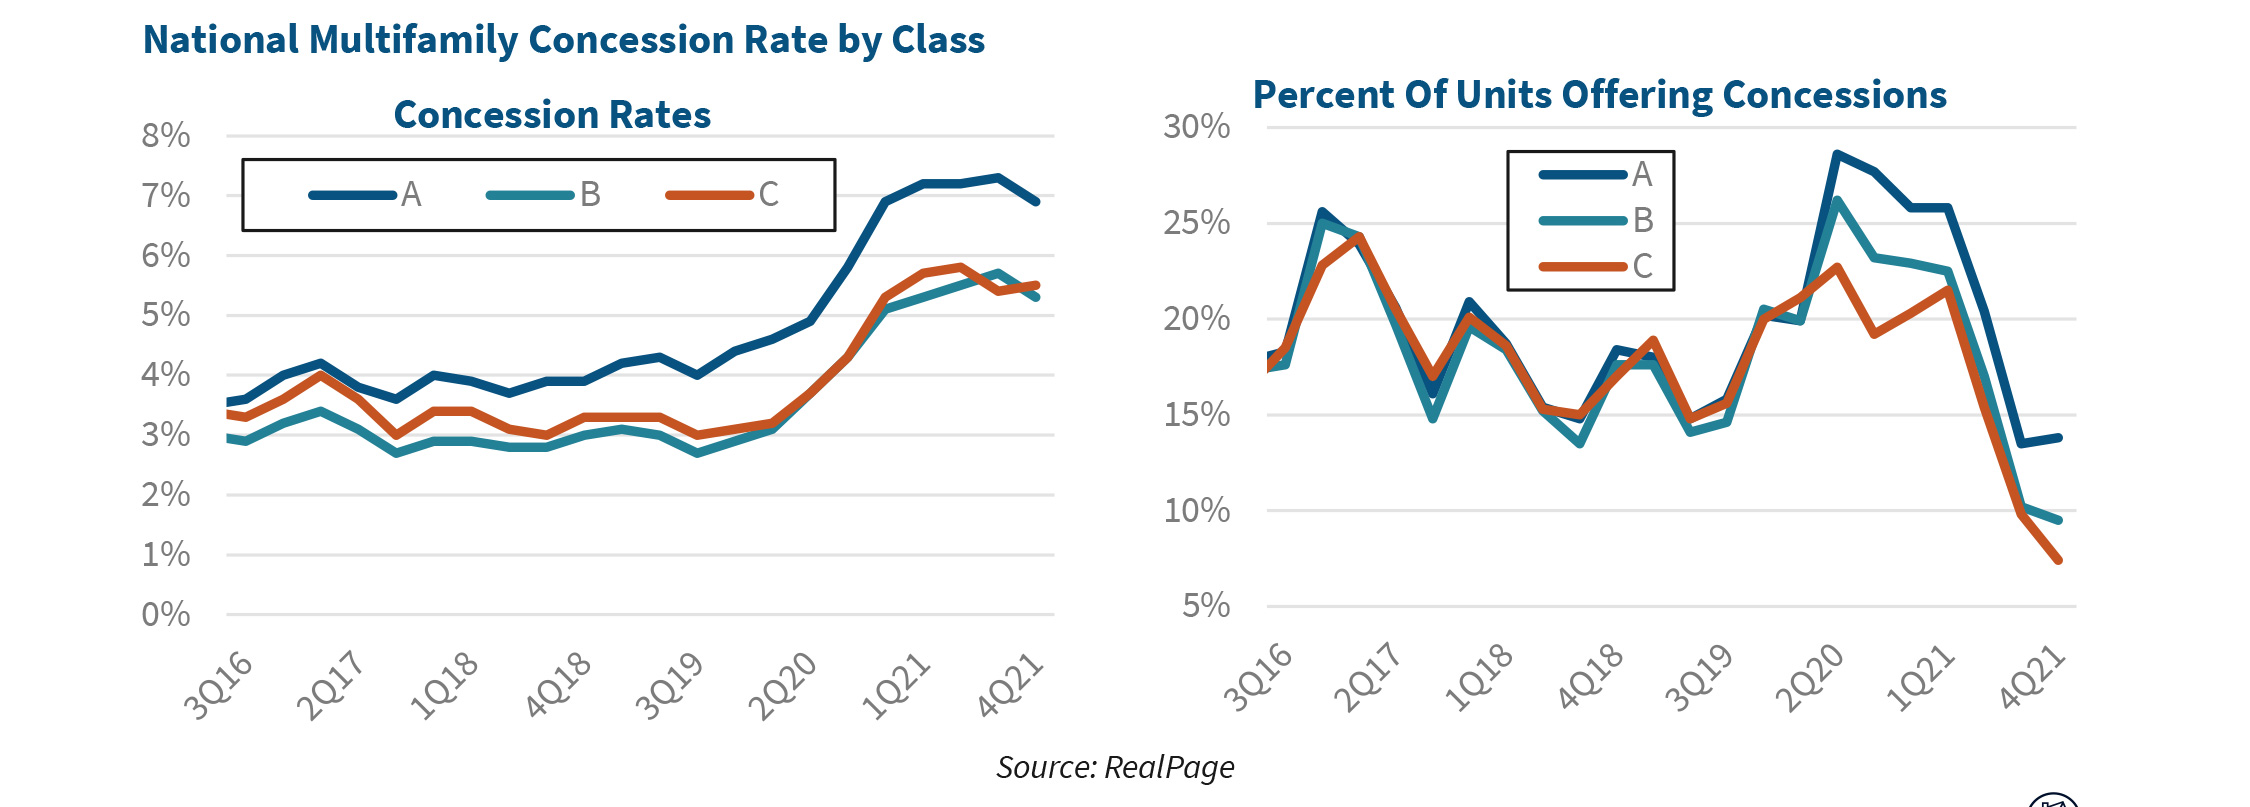 National Multifamily Concession Rate by Class